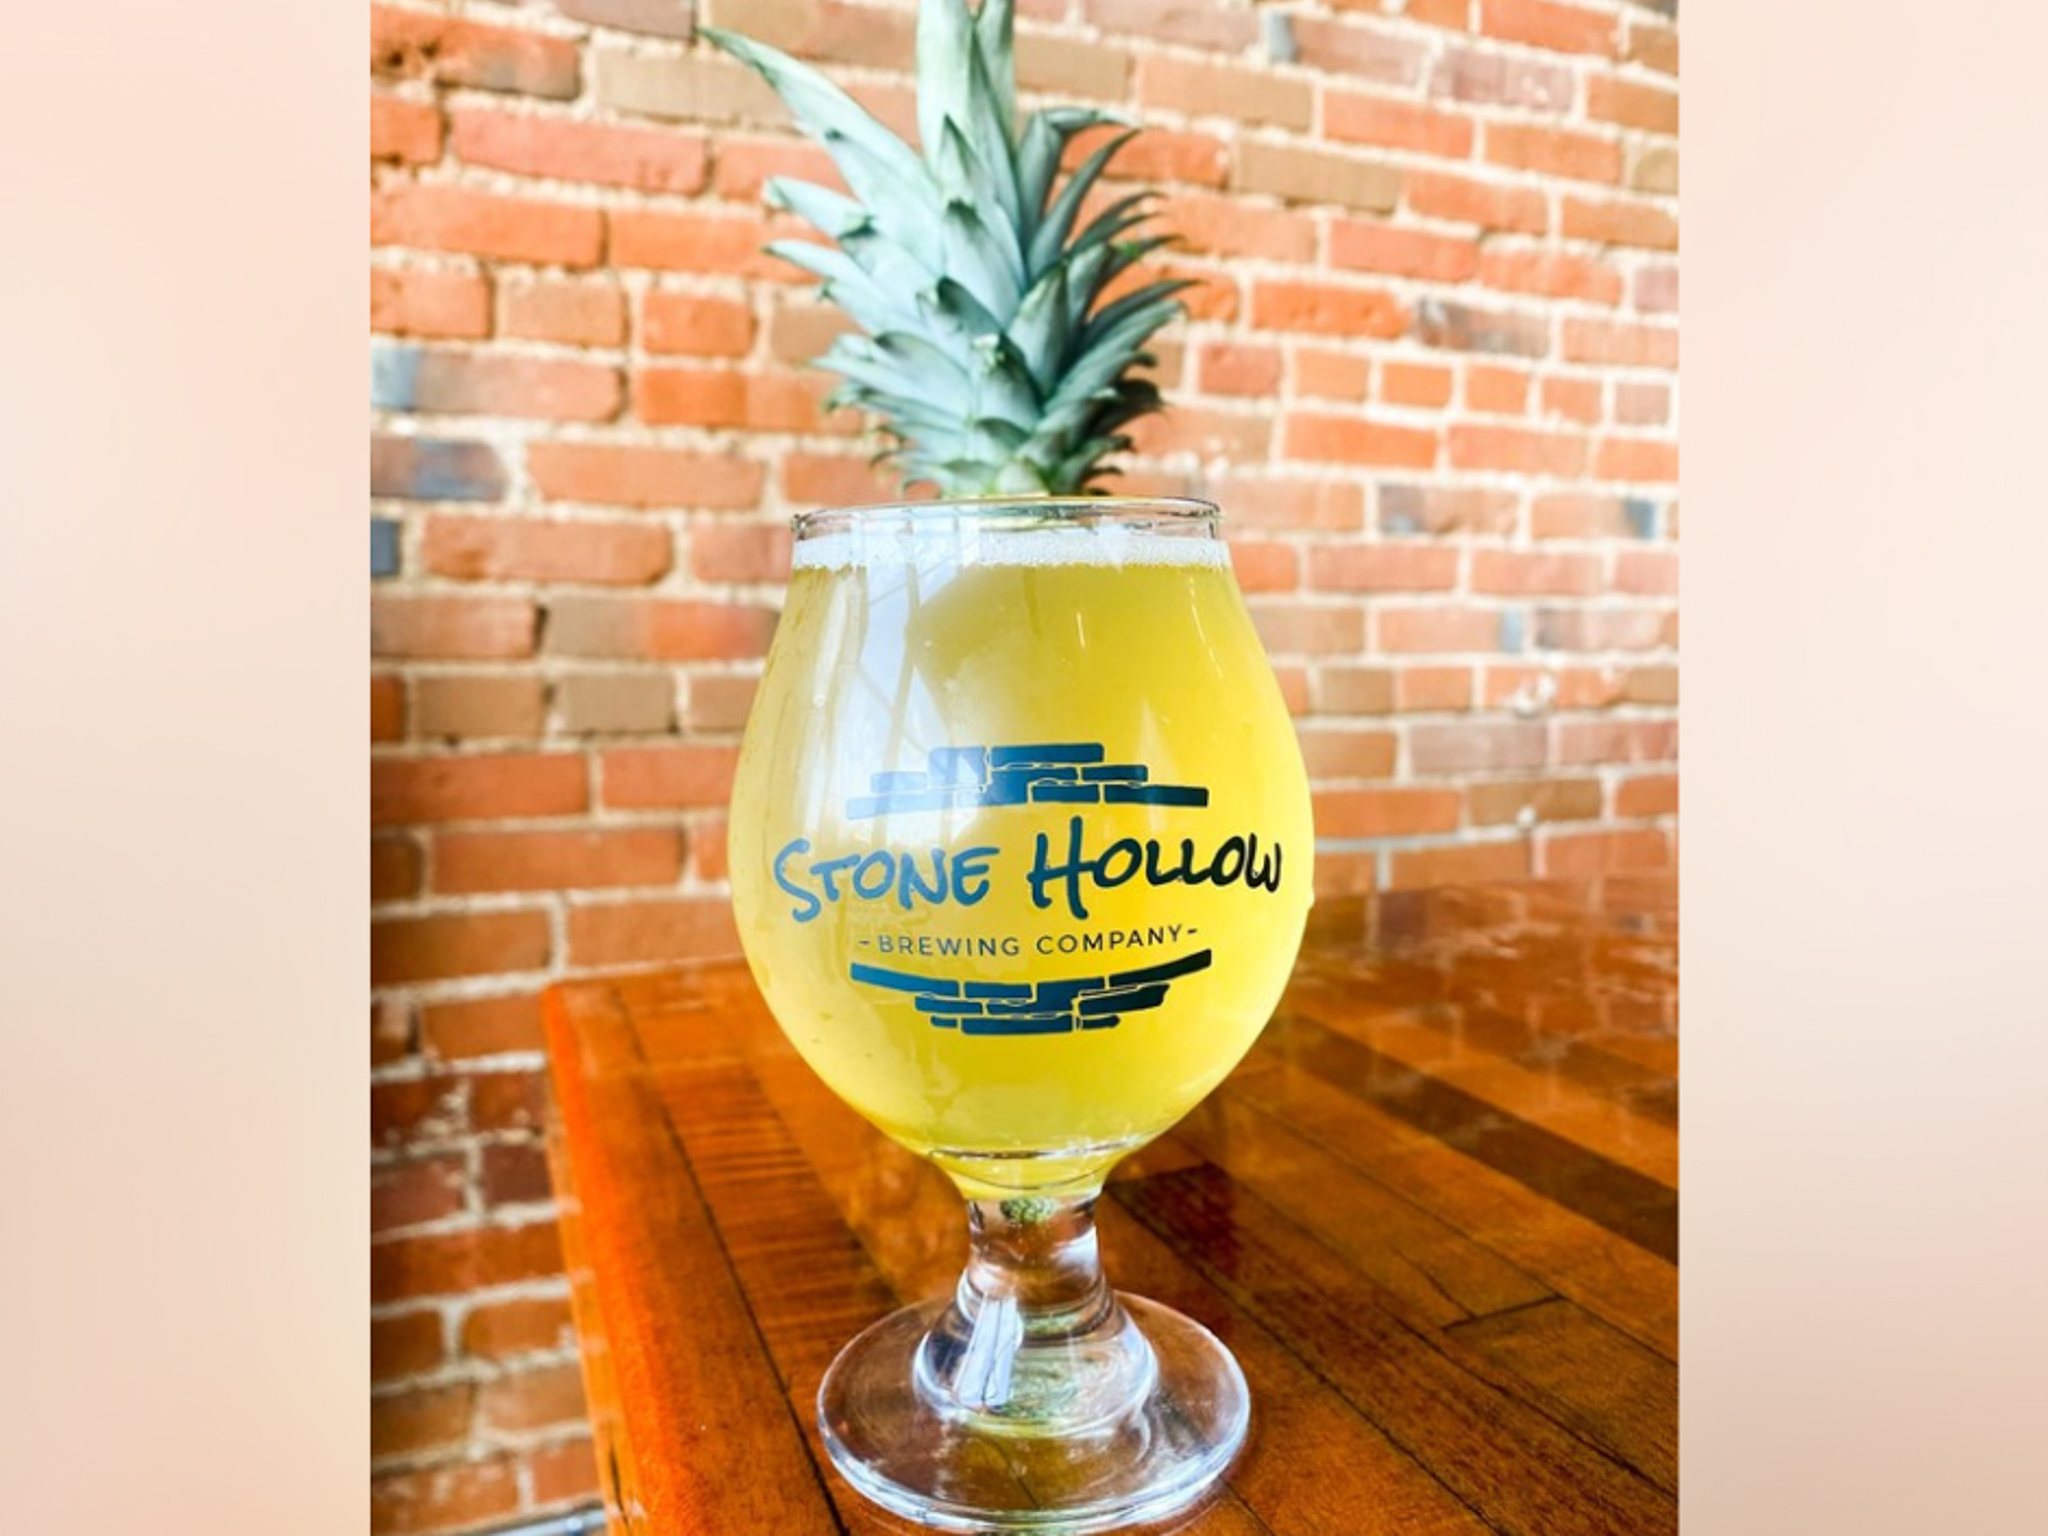 Stone Hollow Brewing